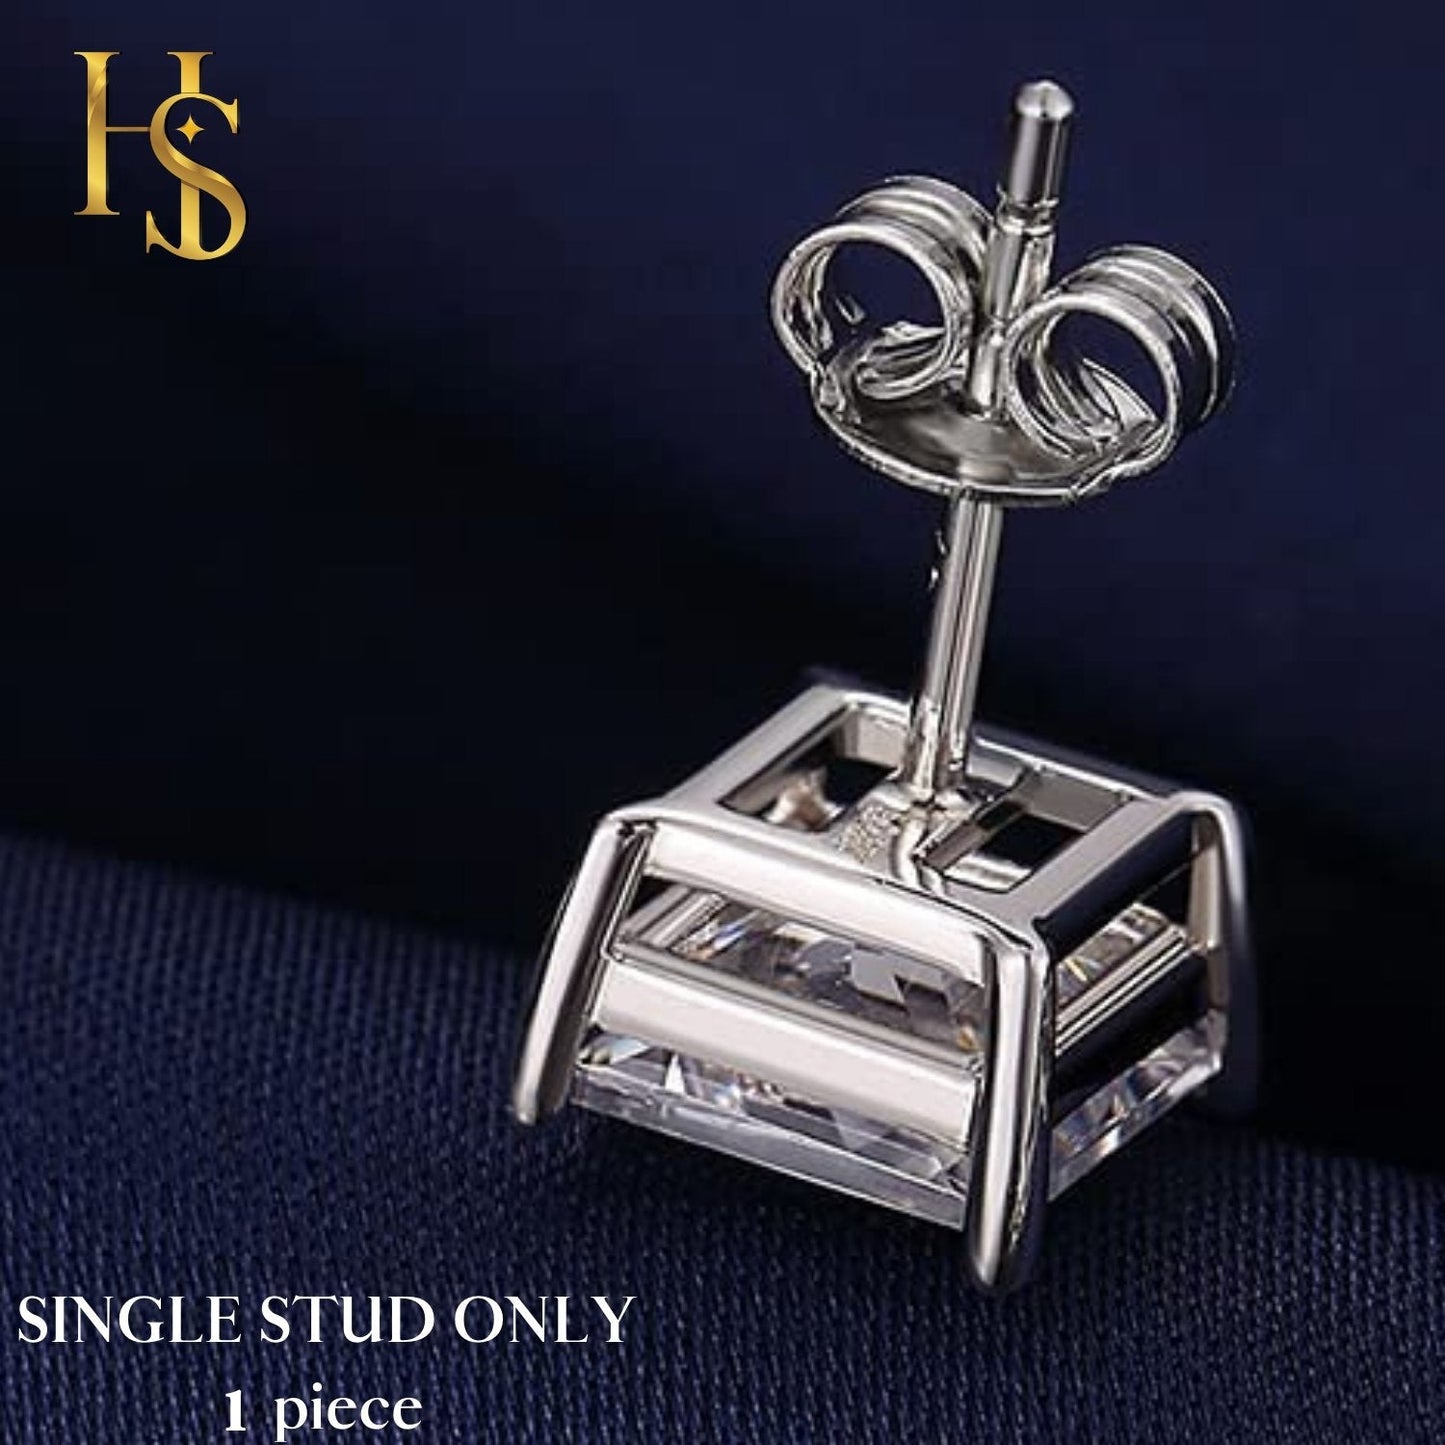 Mens Square Solitaire Earring embellished with Swarovski Zirconia.